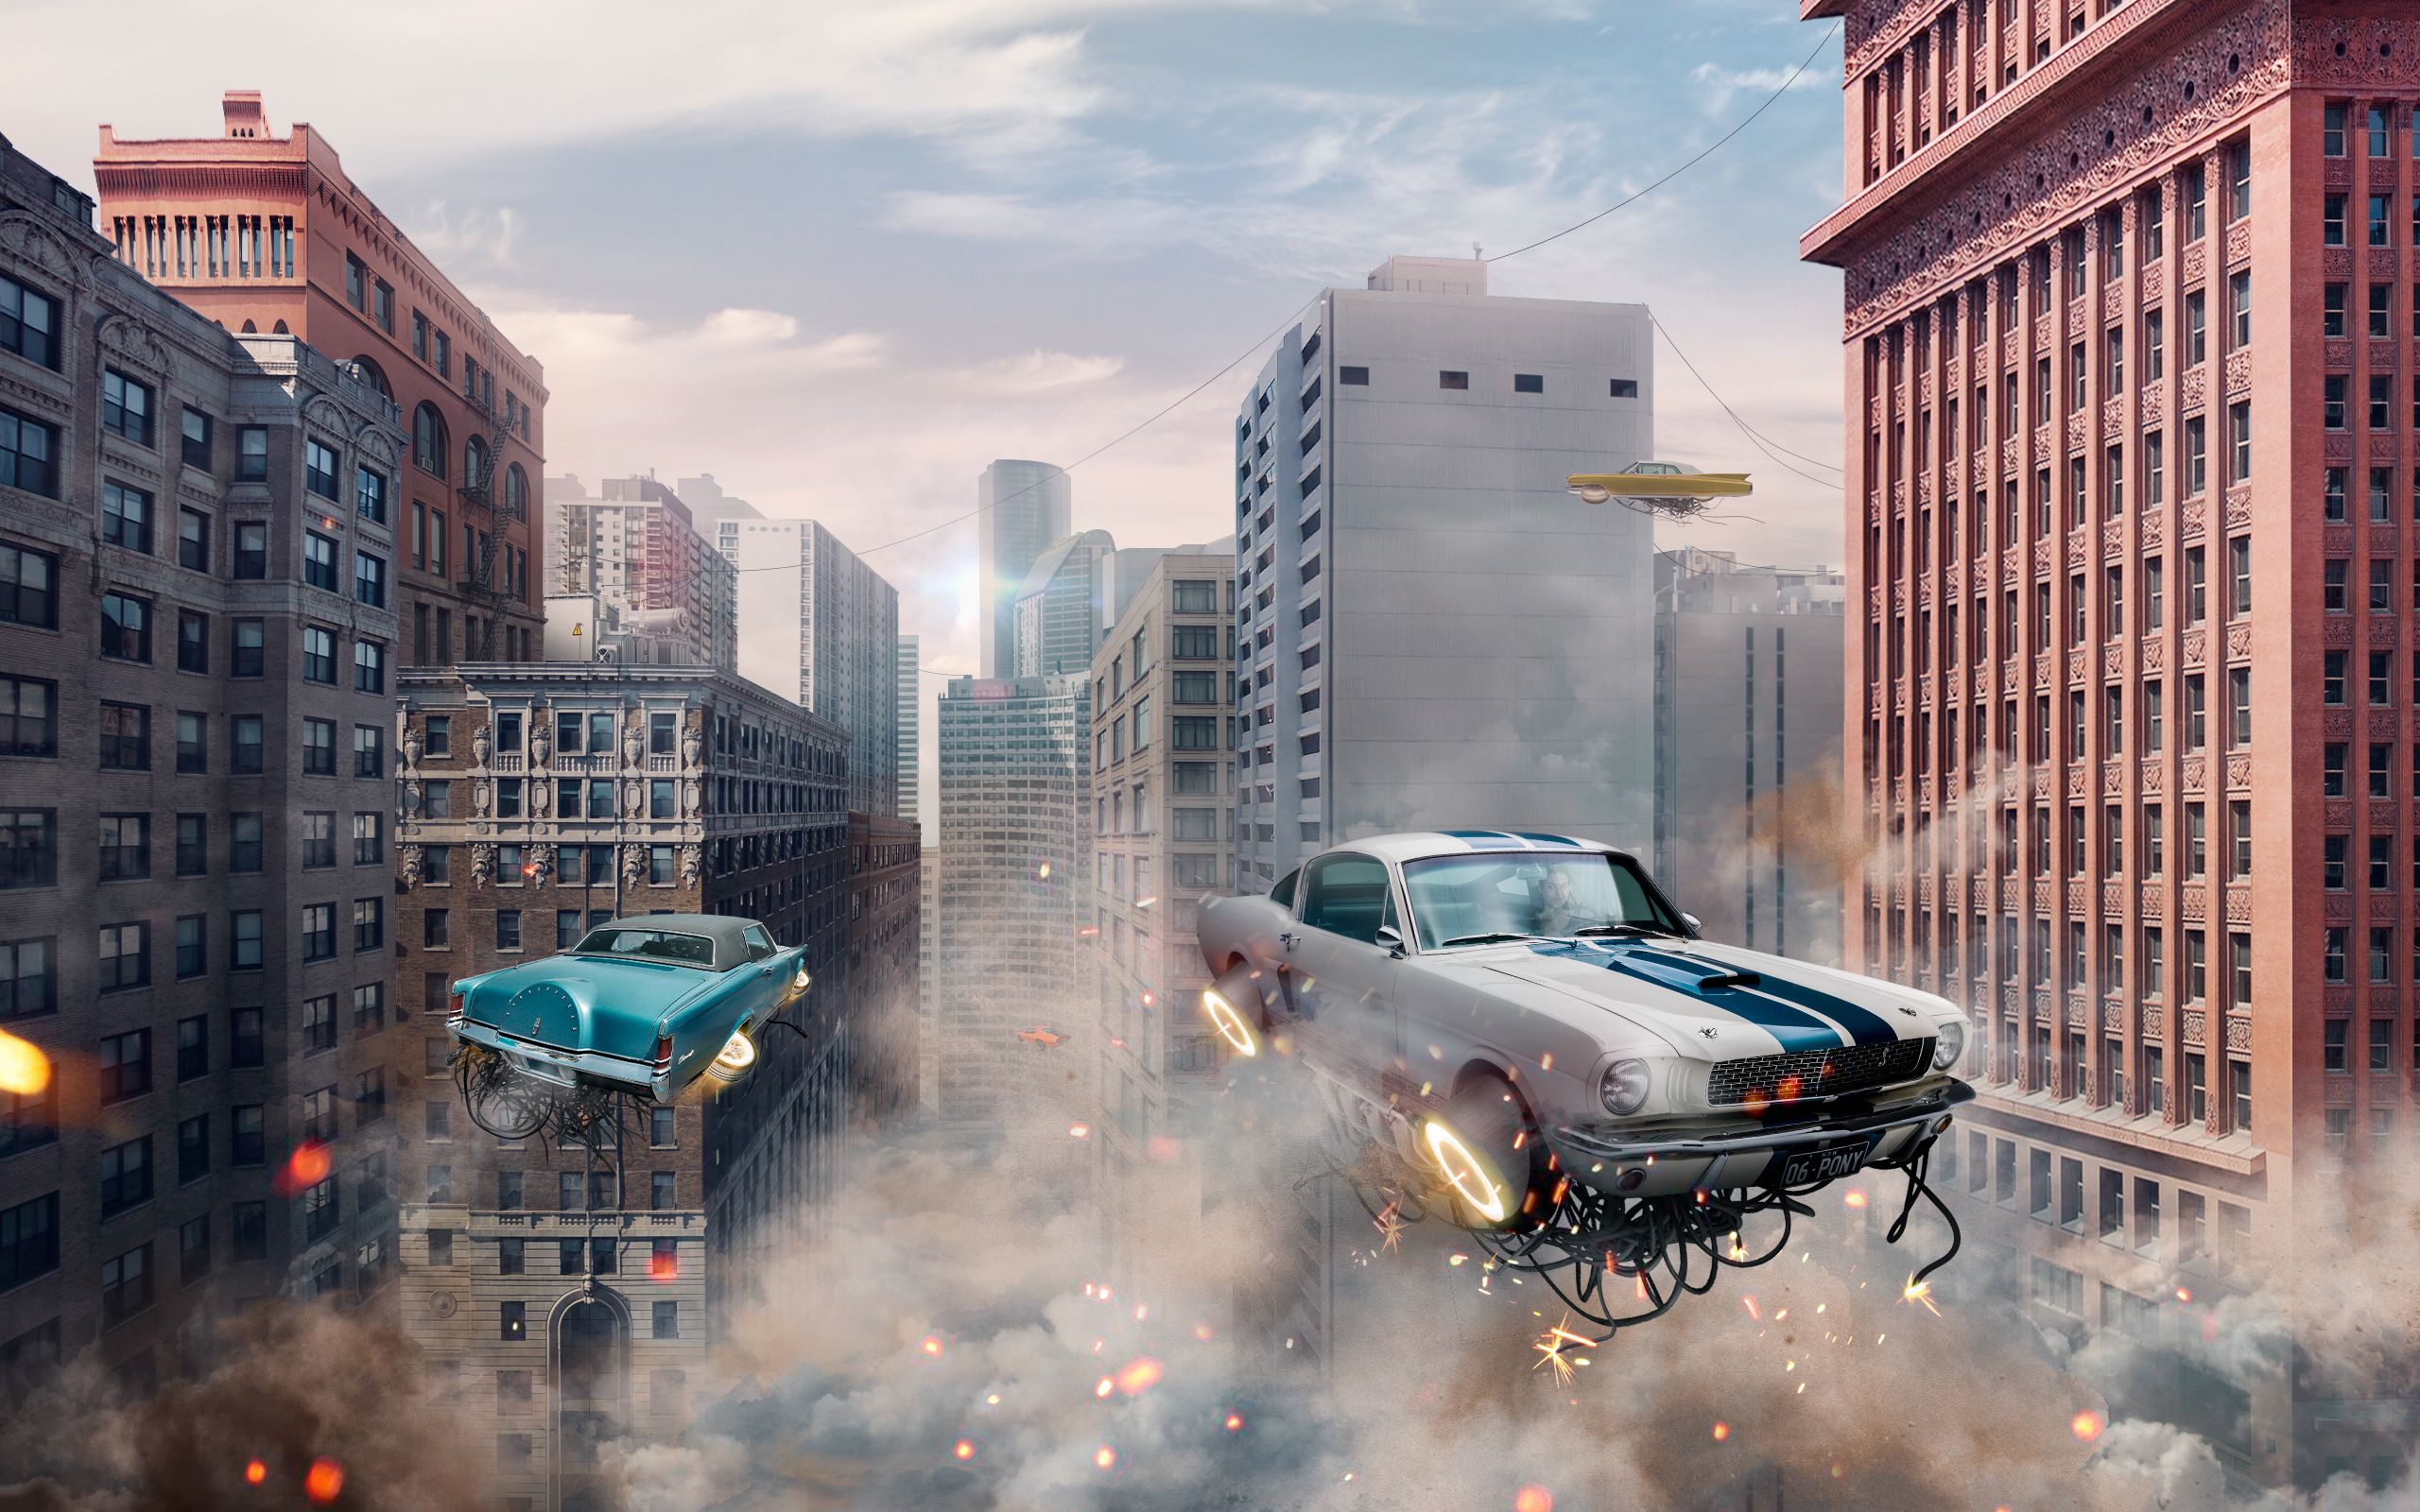 Retro Futuristic Cars Flying In The City, HD Cars, 4k Wallpaper